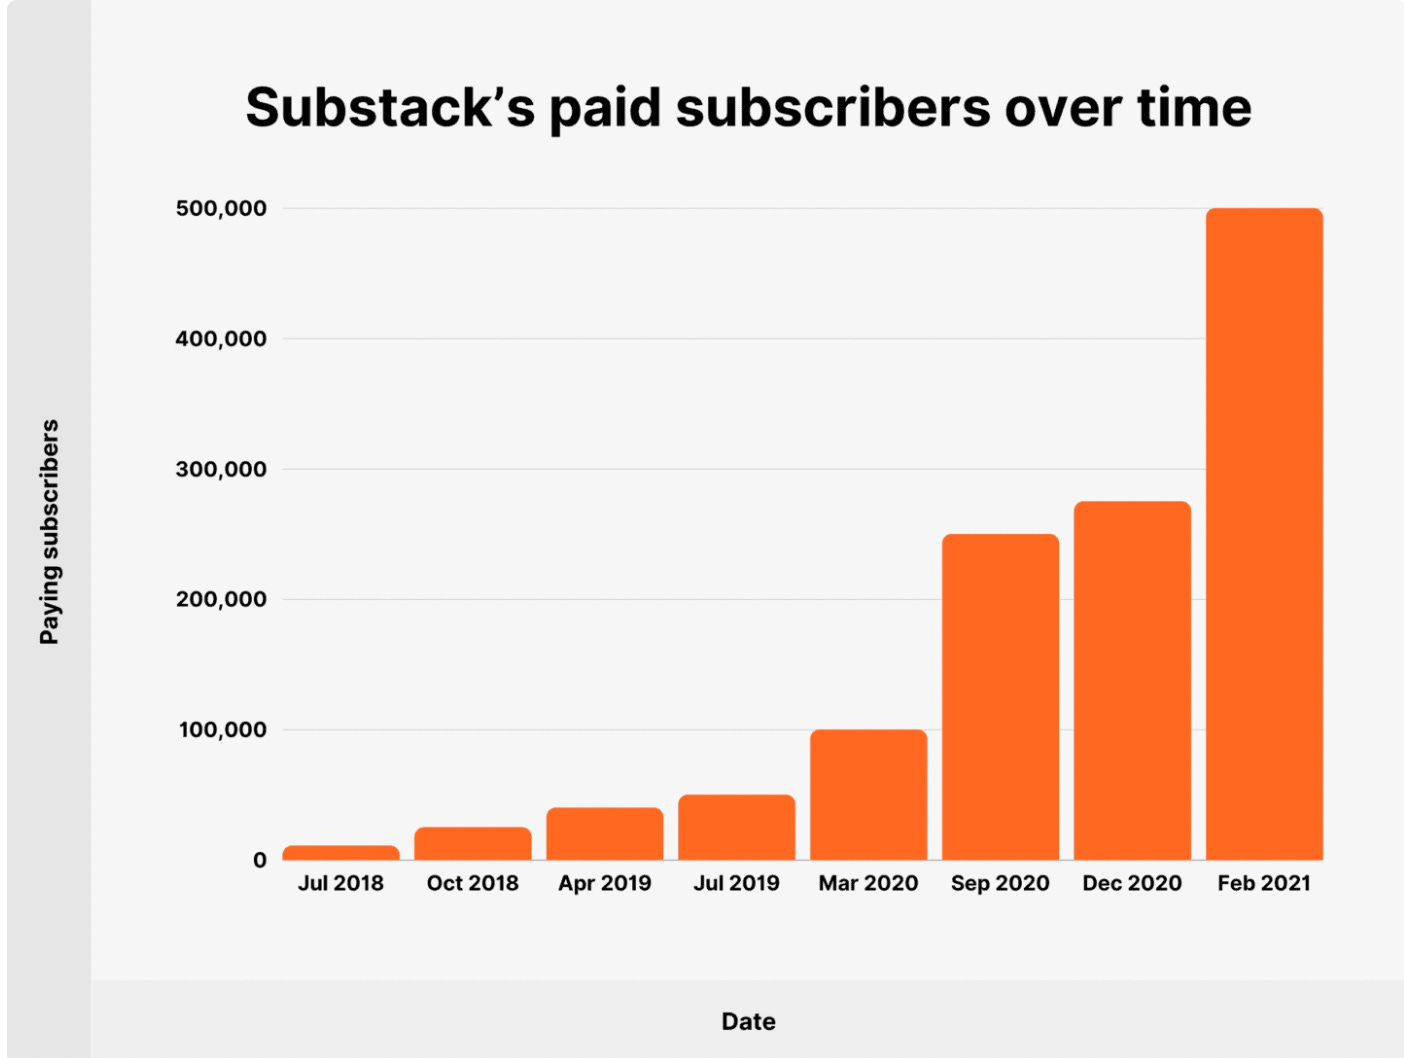 Substack's paid subscribers over years